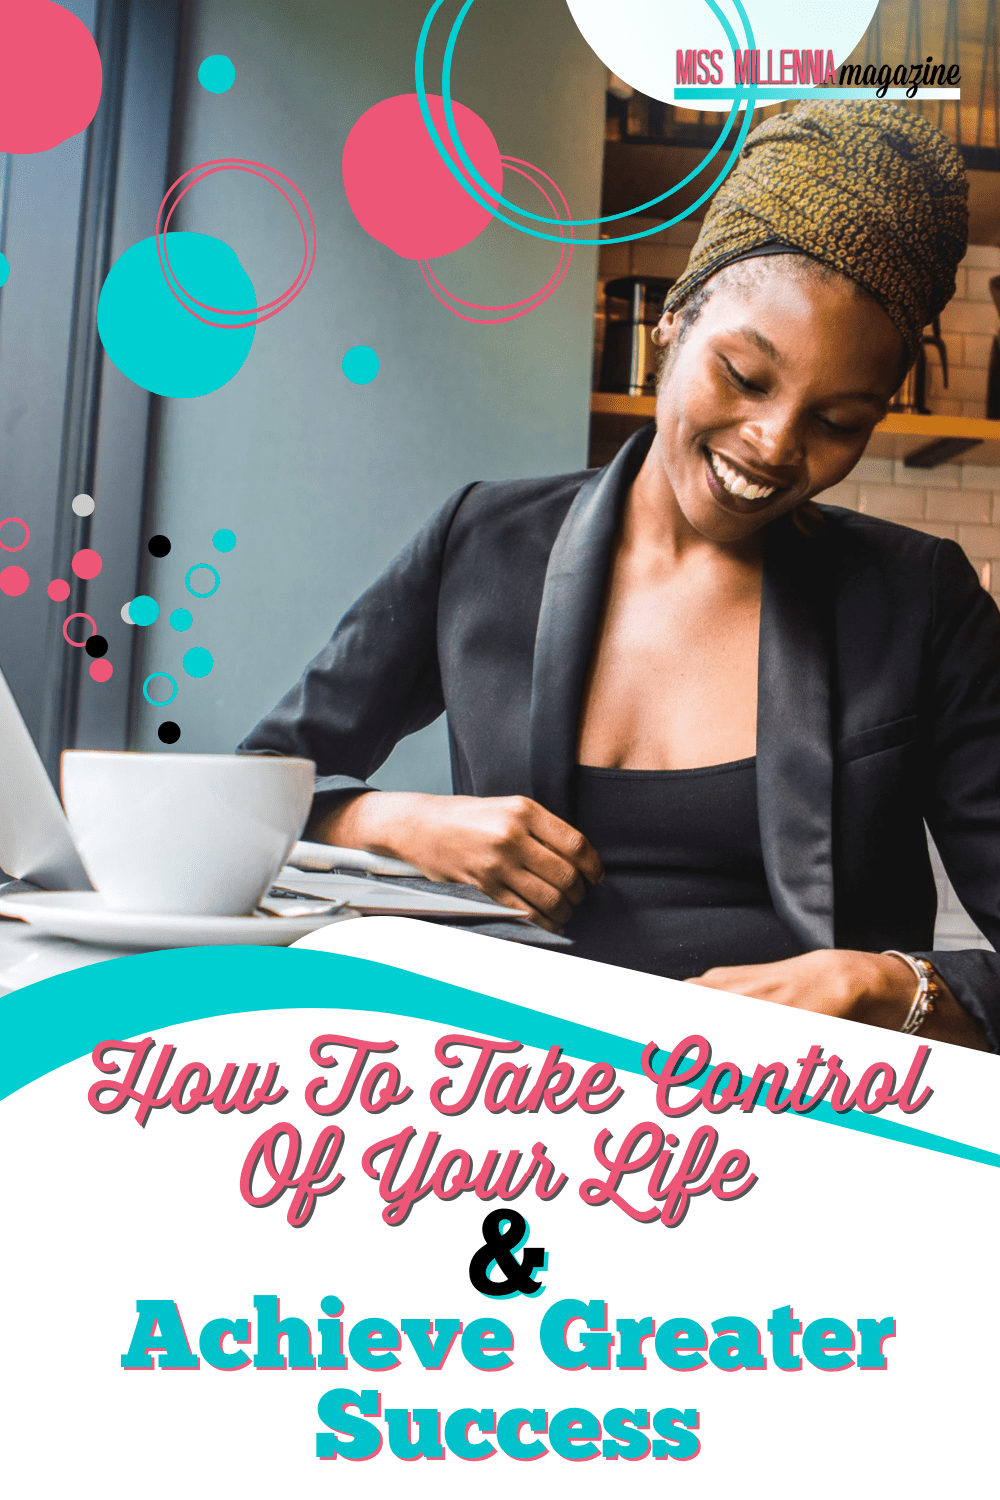 How To Take Control Of Your Life & Achieve Greater Success